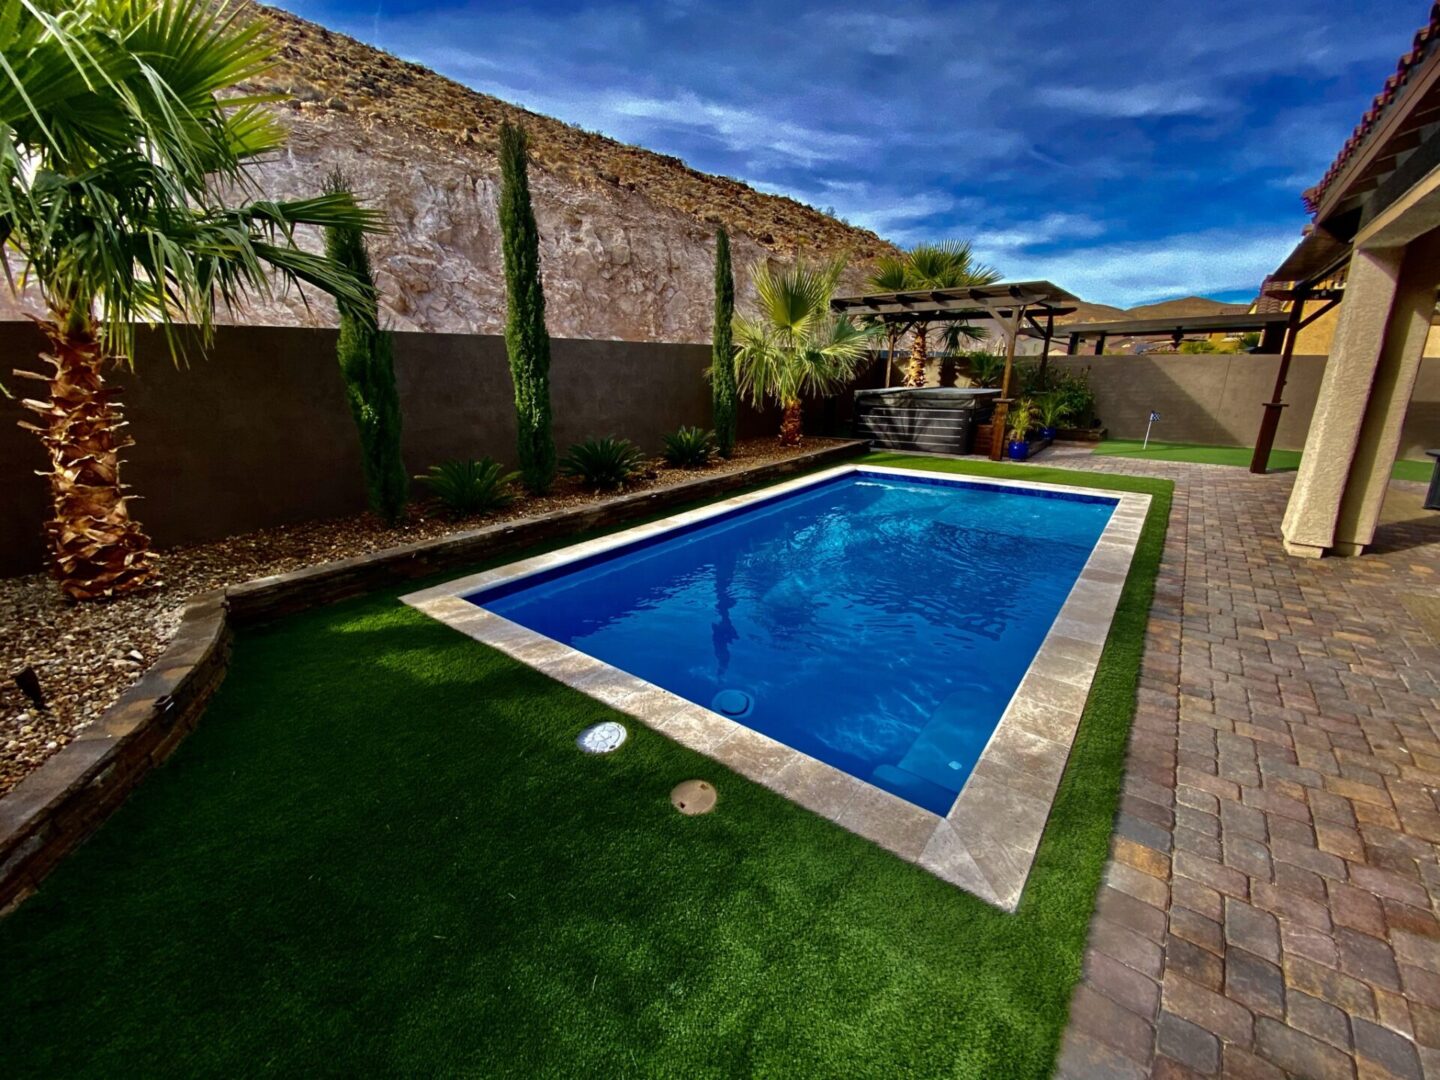 A pool with grass and palm trees in the background.